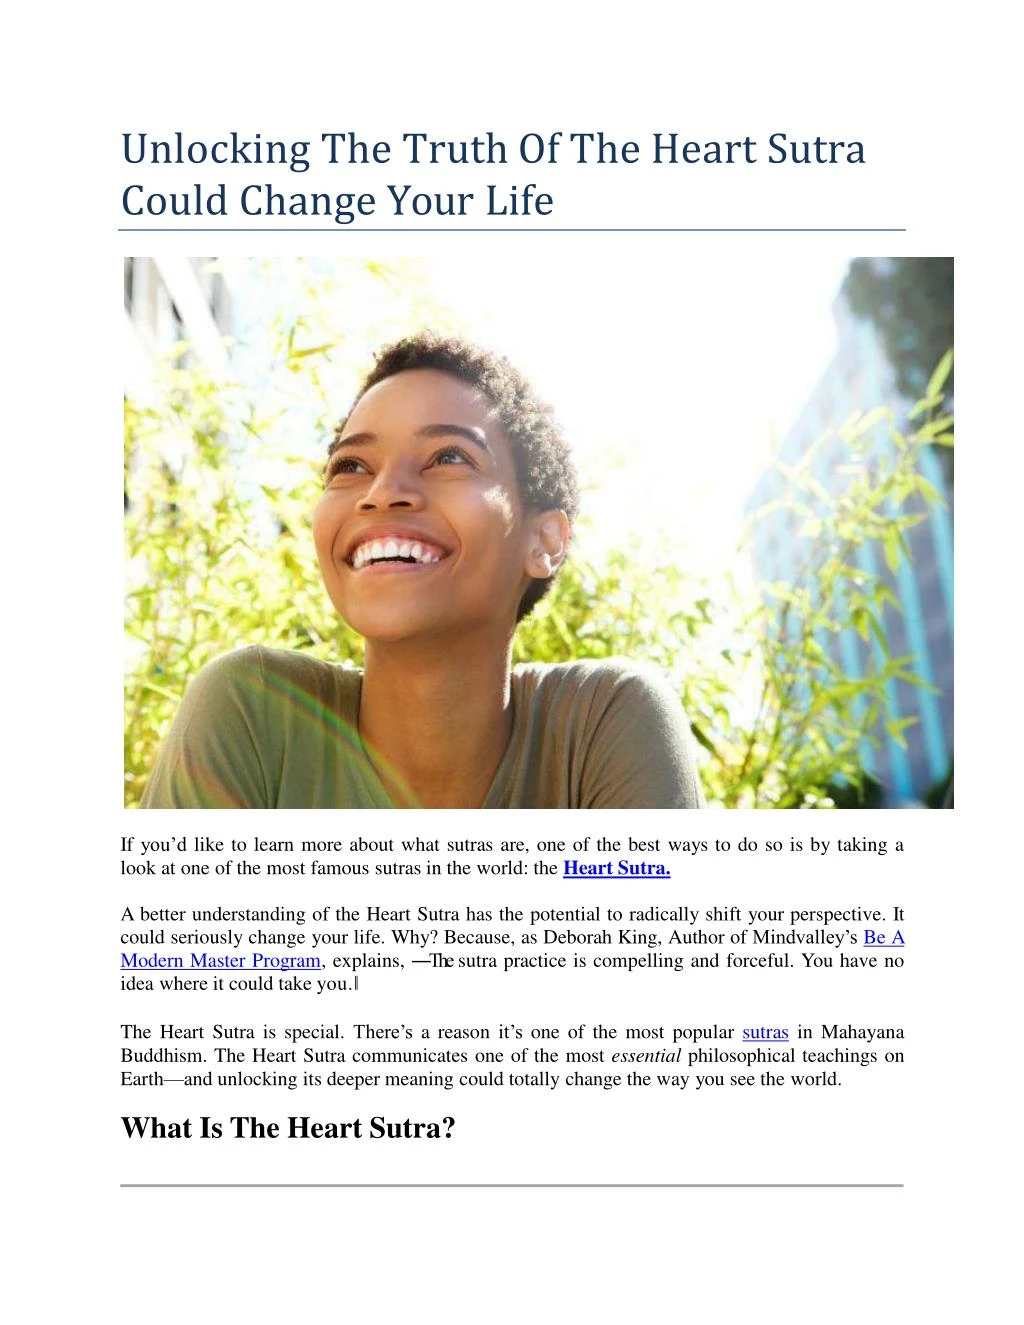 unlocking the truth of the heart sutra could change your life